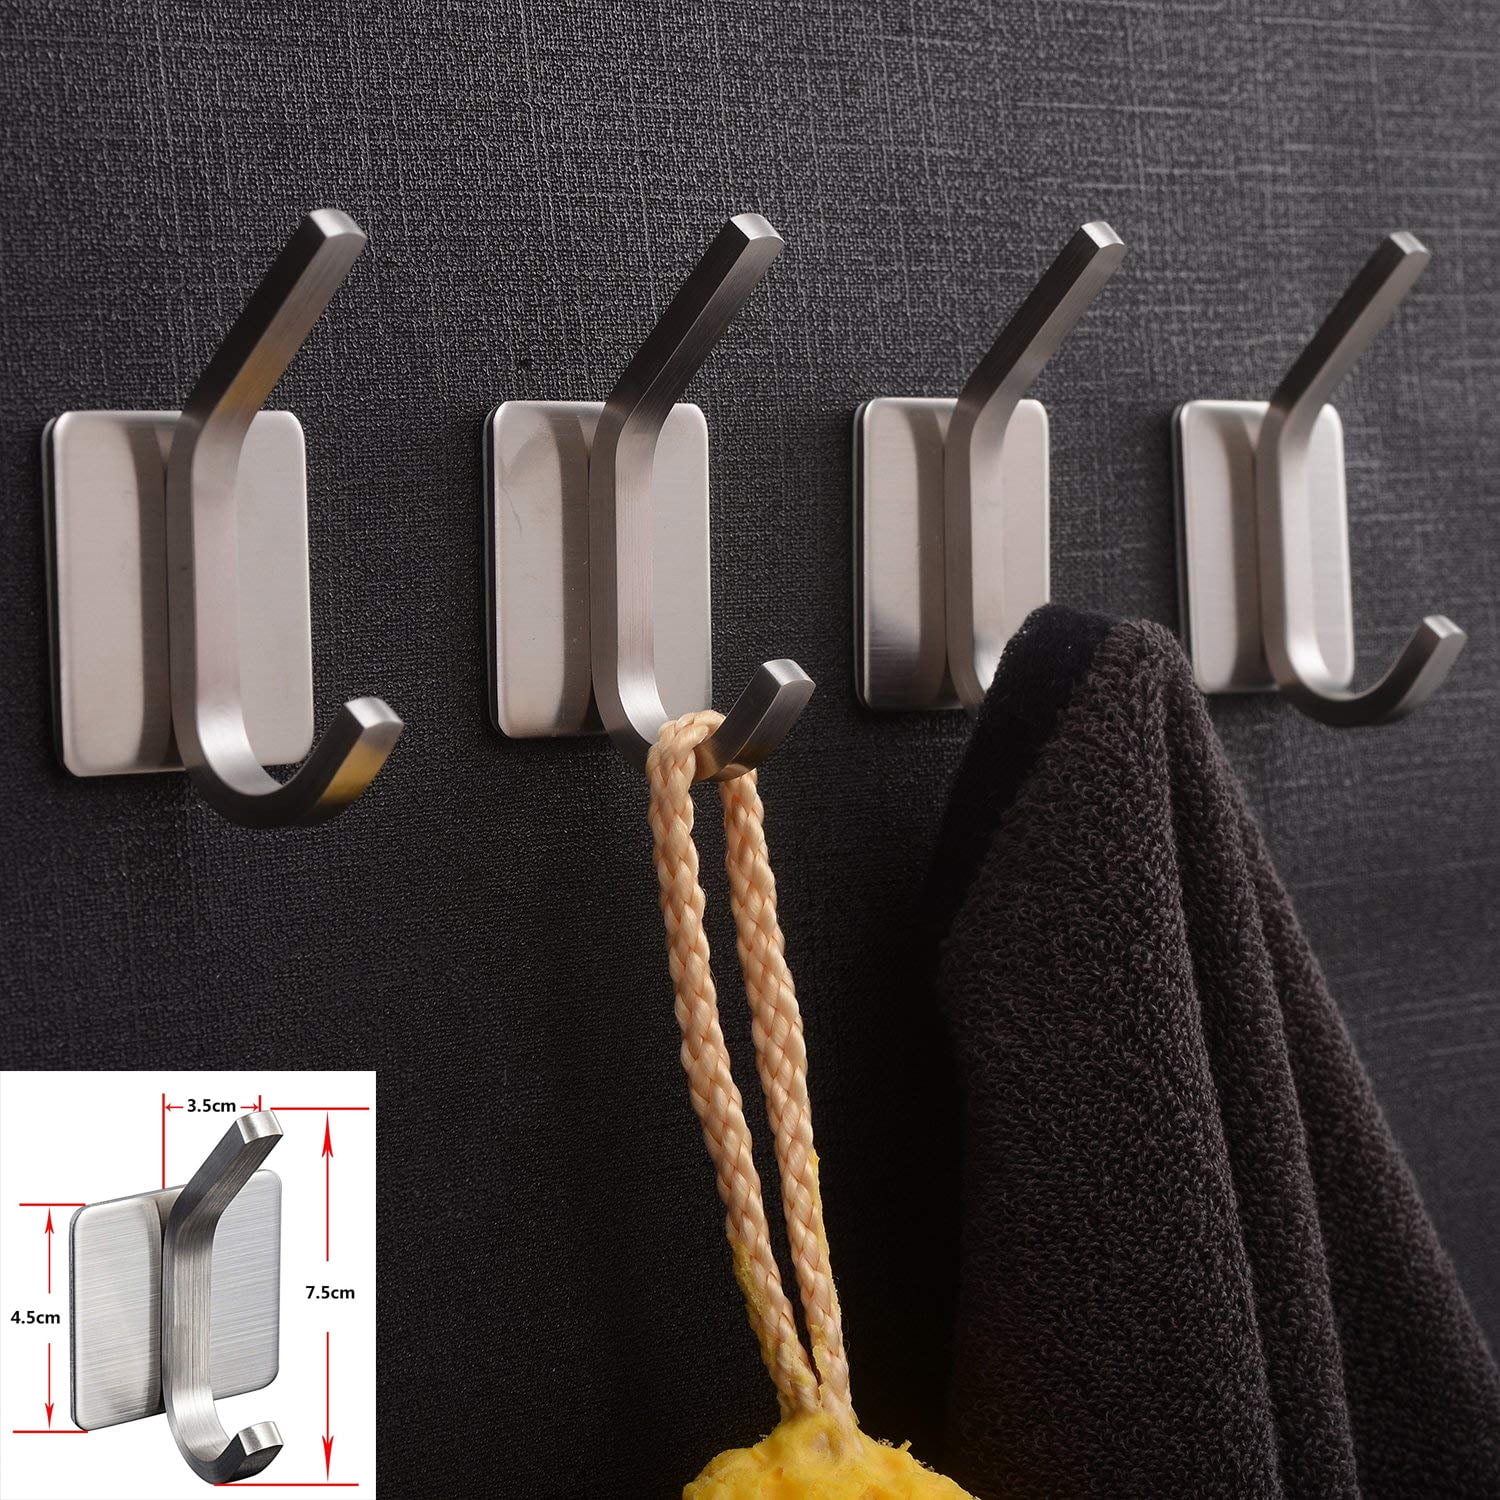 8Pc Kitchen Bathroom 3M Self Adhesive Sticky Hooks Wall Hanger for Towel Robe BT 